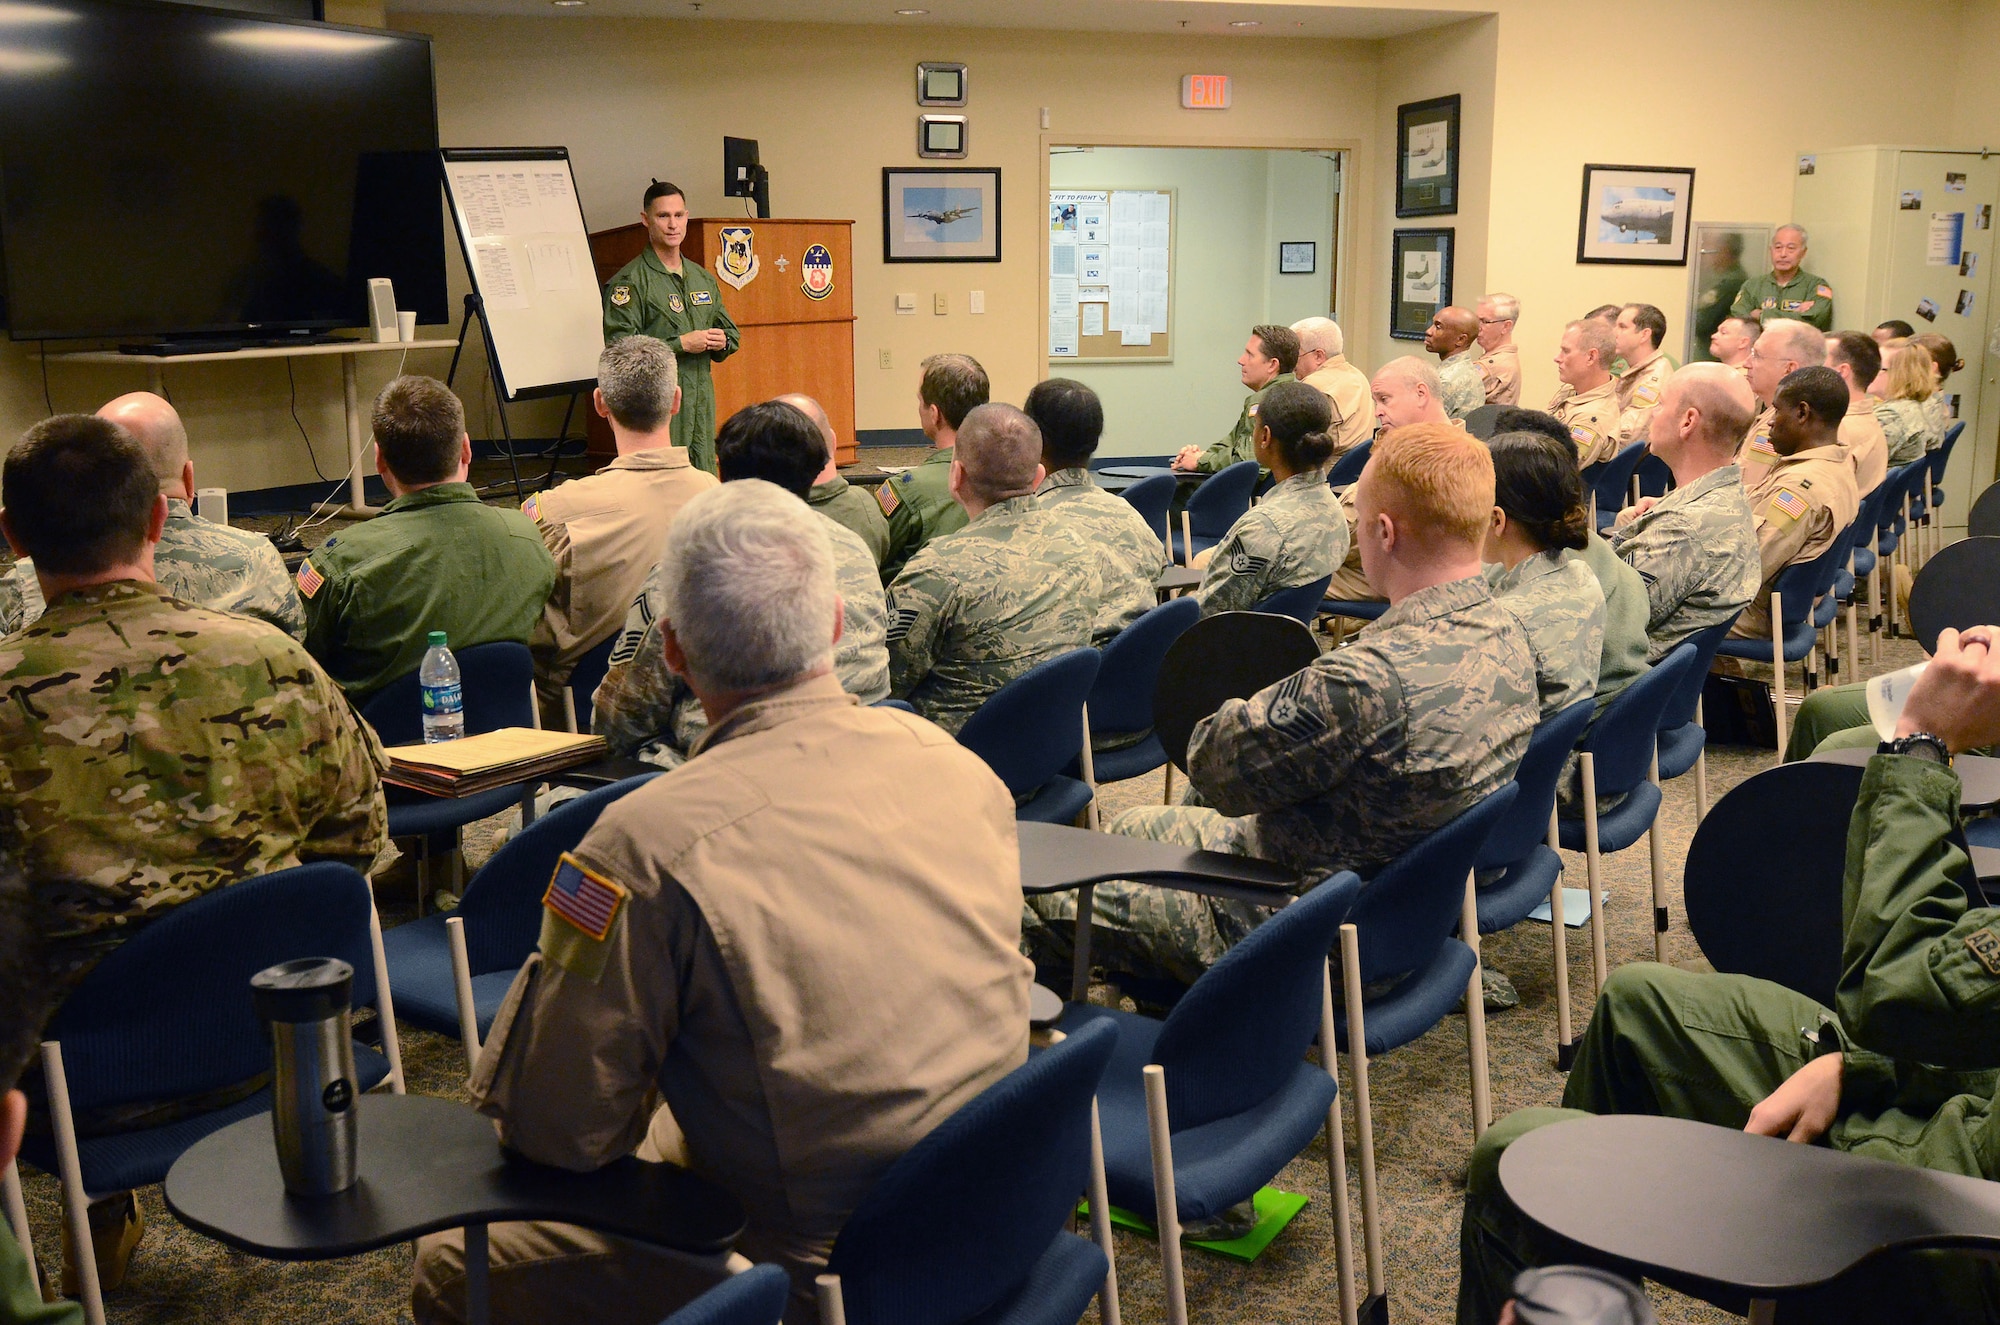 Col. Brett Clark, commander 94th Airlift Wing, addresses members of the wing prior to their deployment to Southwest Asia; Dobbins Air Reserve Base, Ga., Jan. 2, 2015. (U.S. Air Force photo/Brad Fallin)